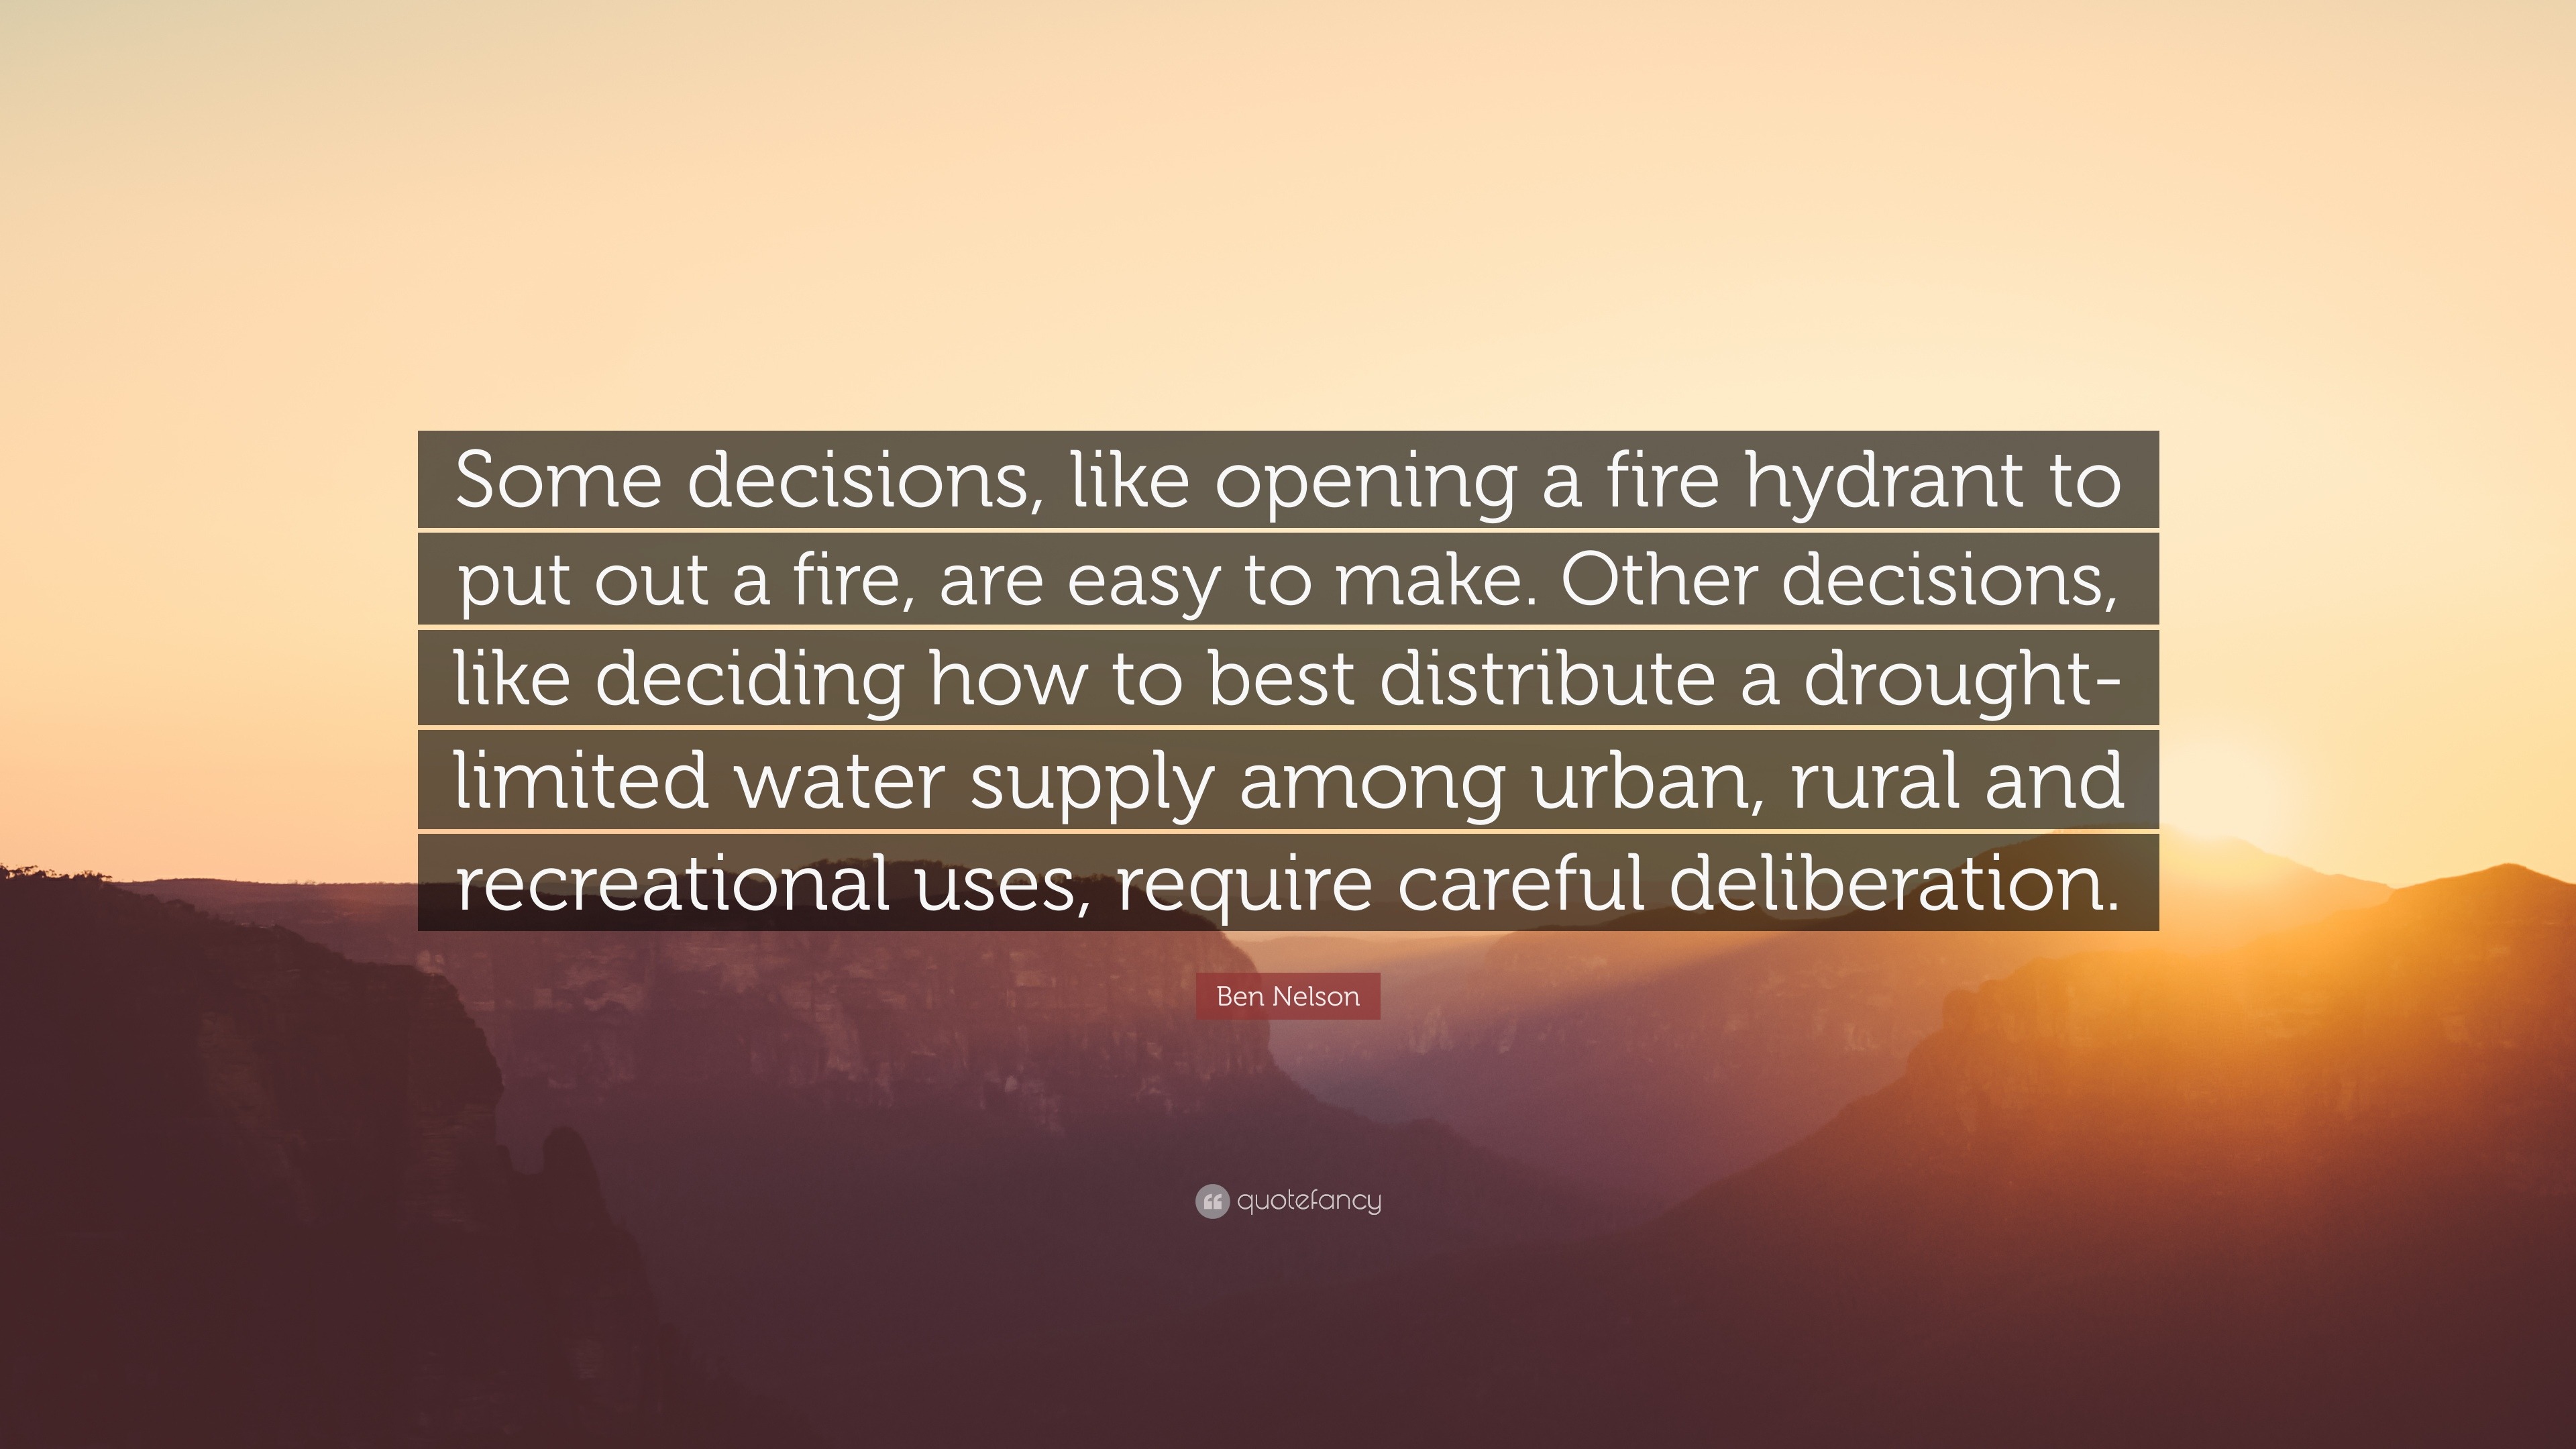 Ben Nelson Quote: "Some decisions, like opening a fire hydrant to put out a fire, are easy to ...